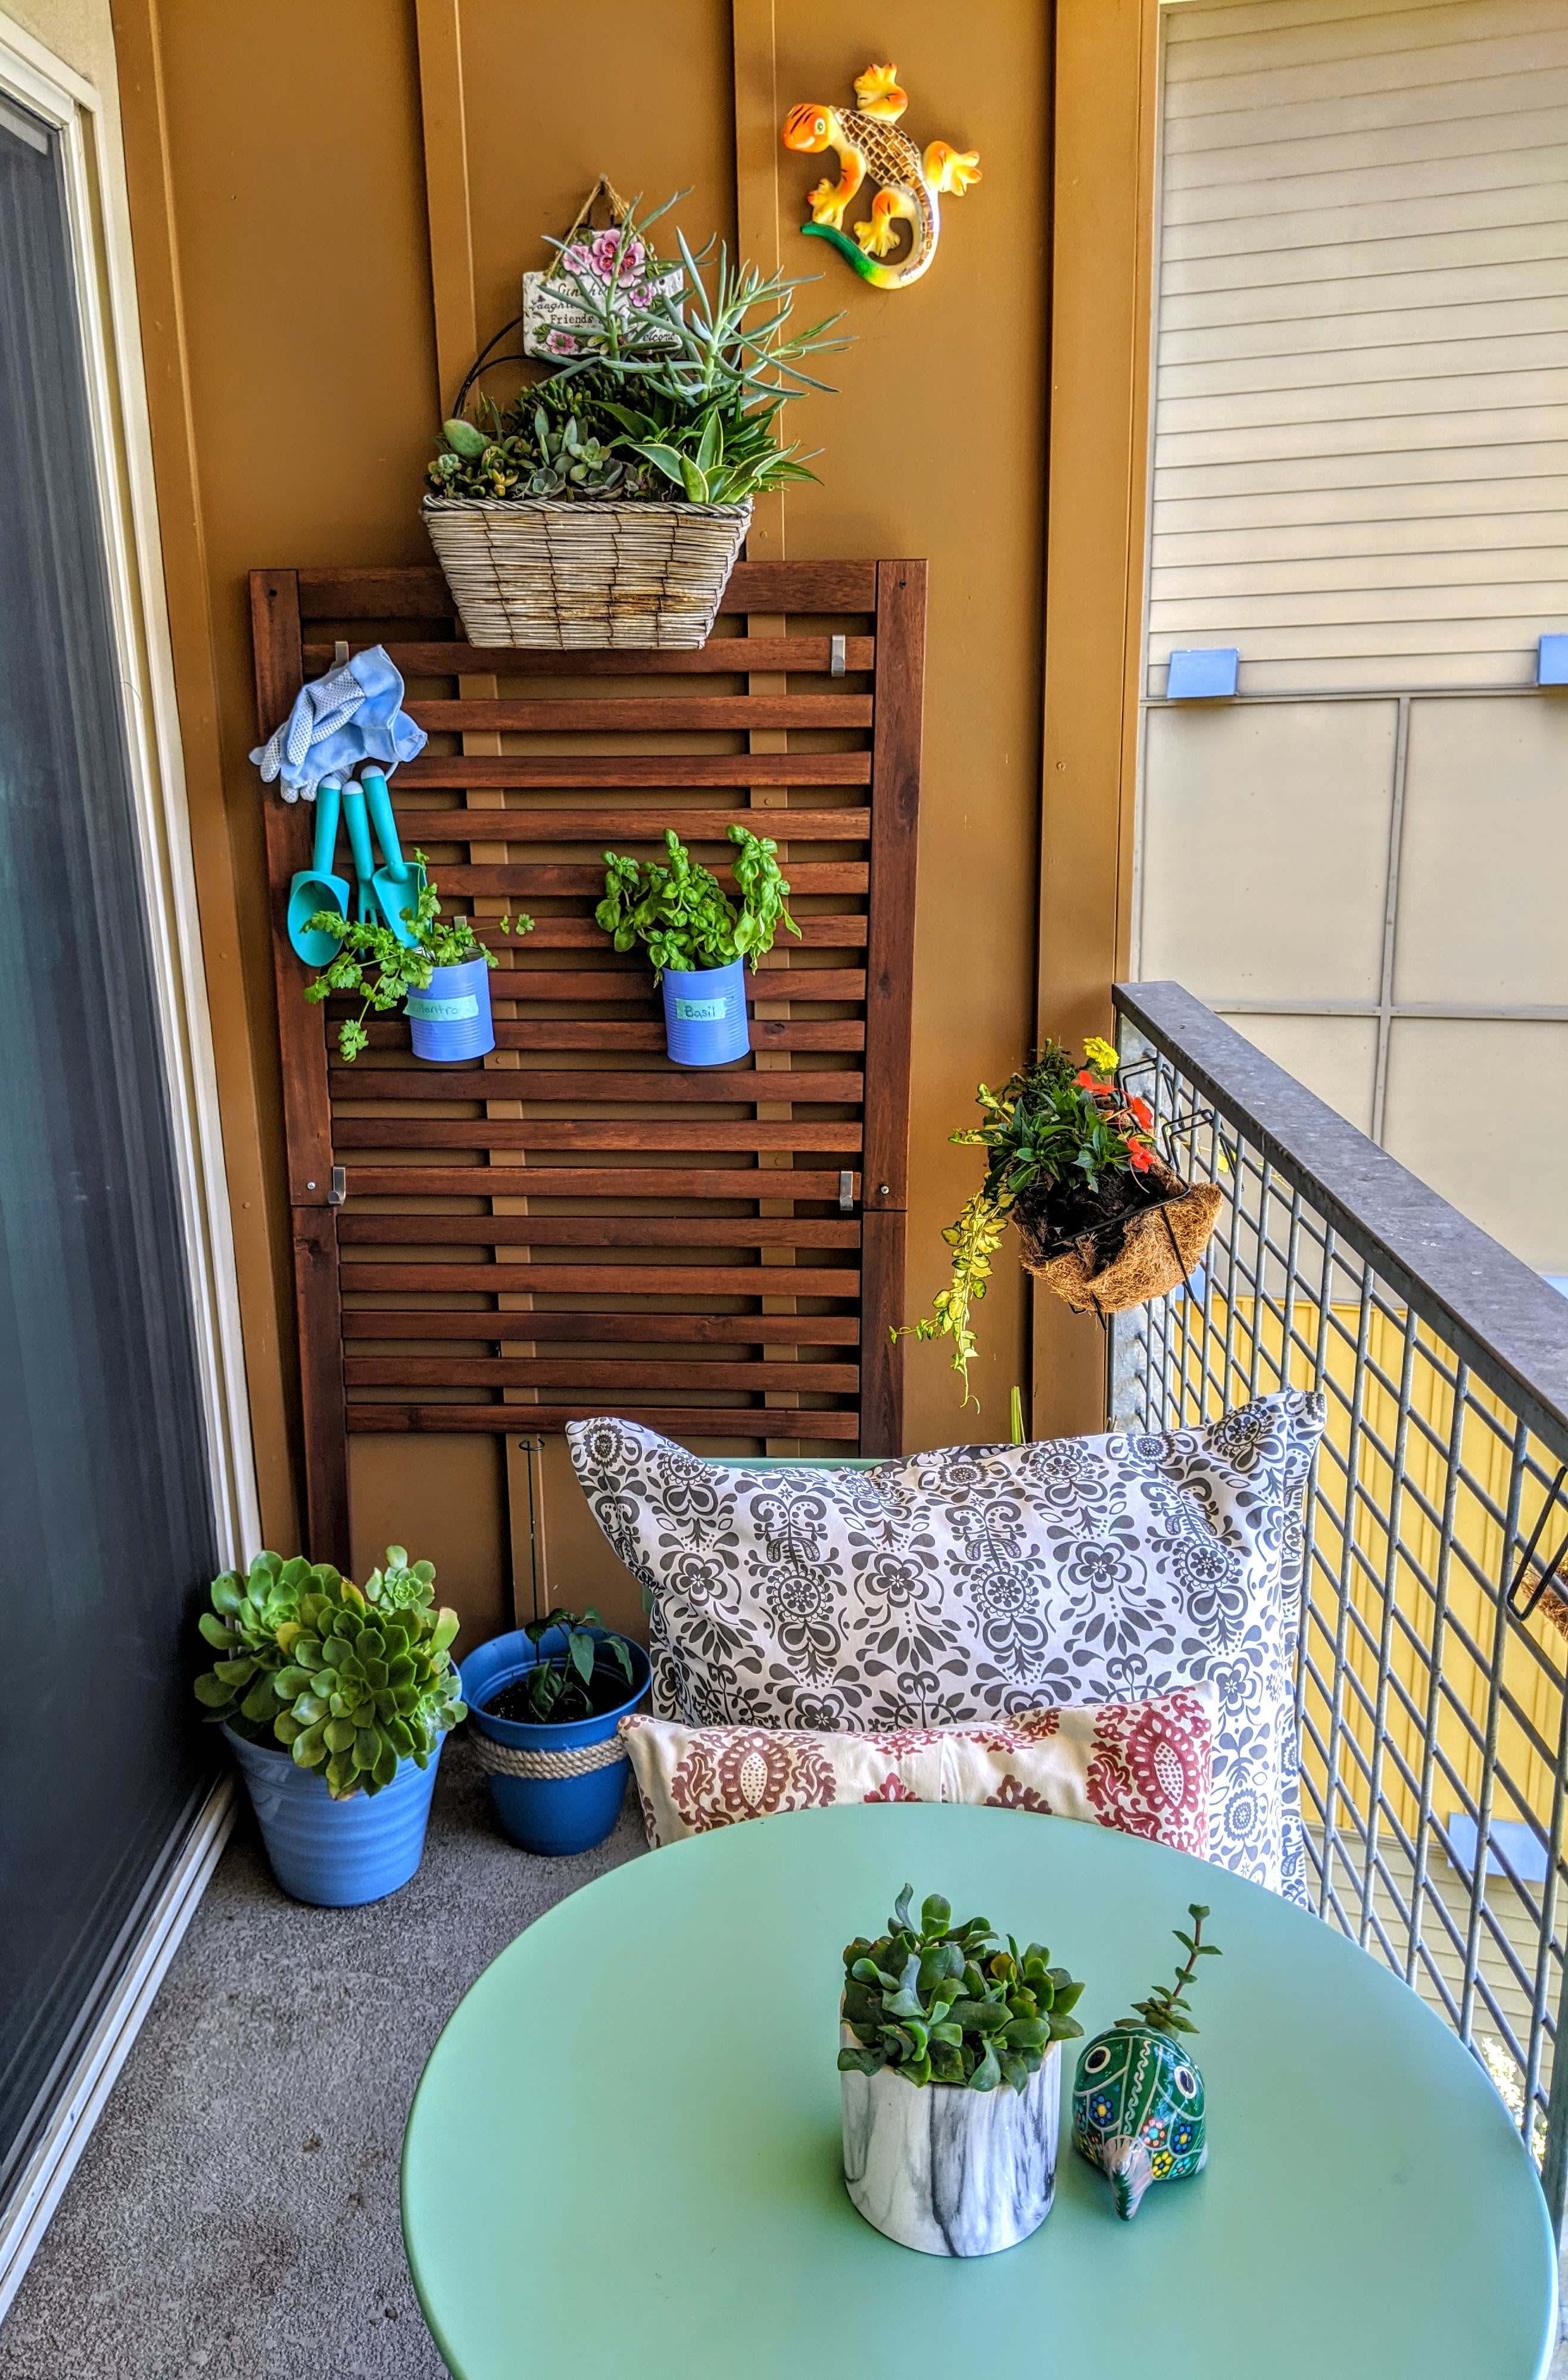 4 Best Balcony Ideas to Decorate a Small Balcony  Apartment Therapy